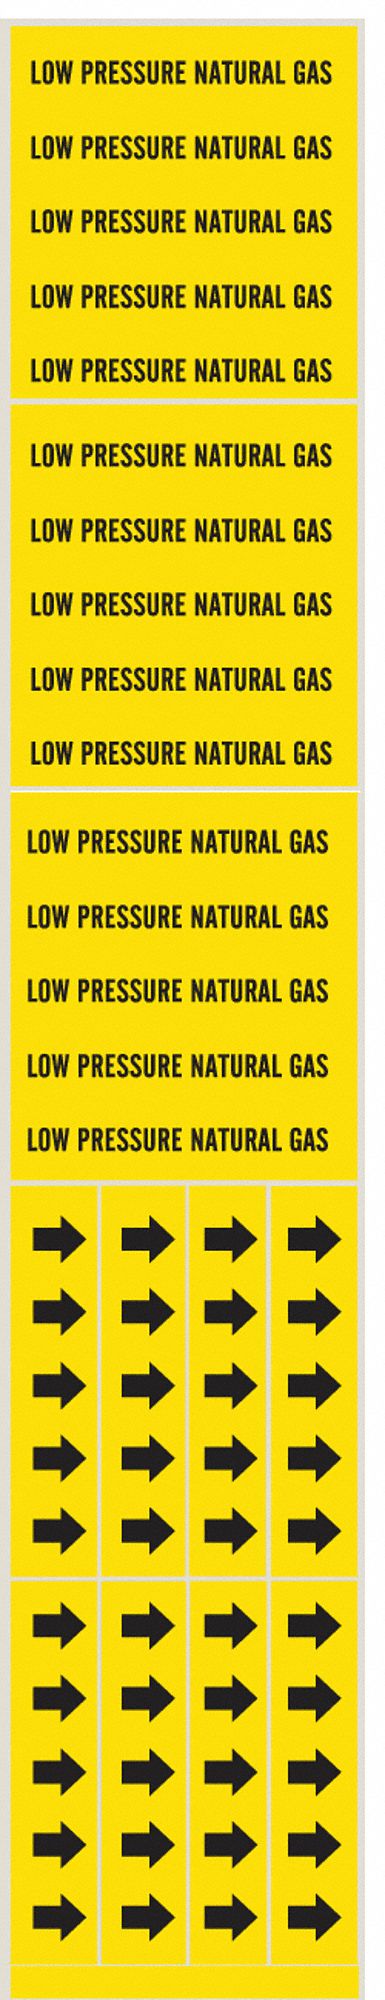 Pipe Mkr,Low Pressure Natural Gas,to 3/4